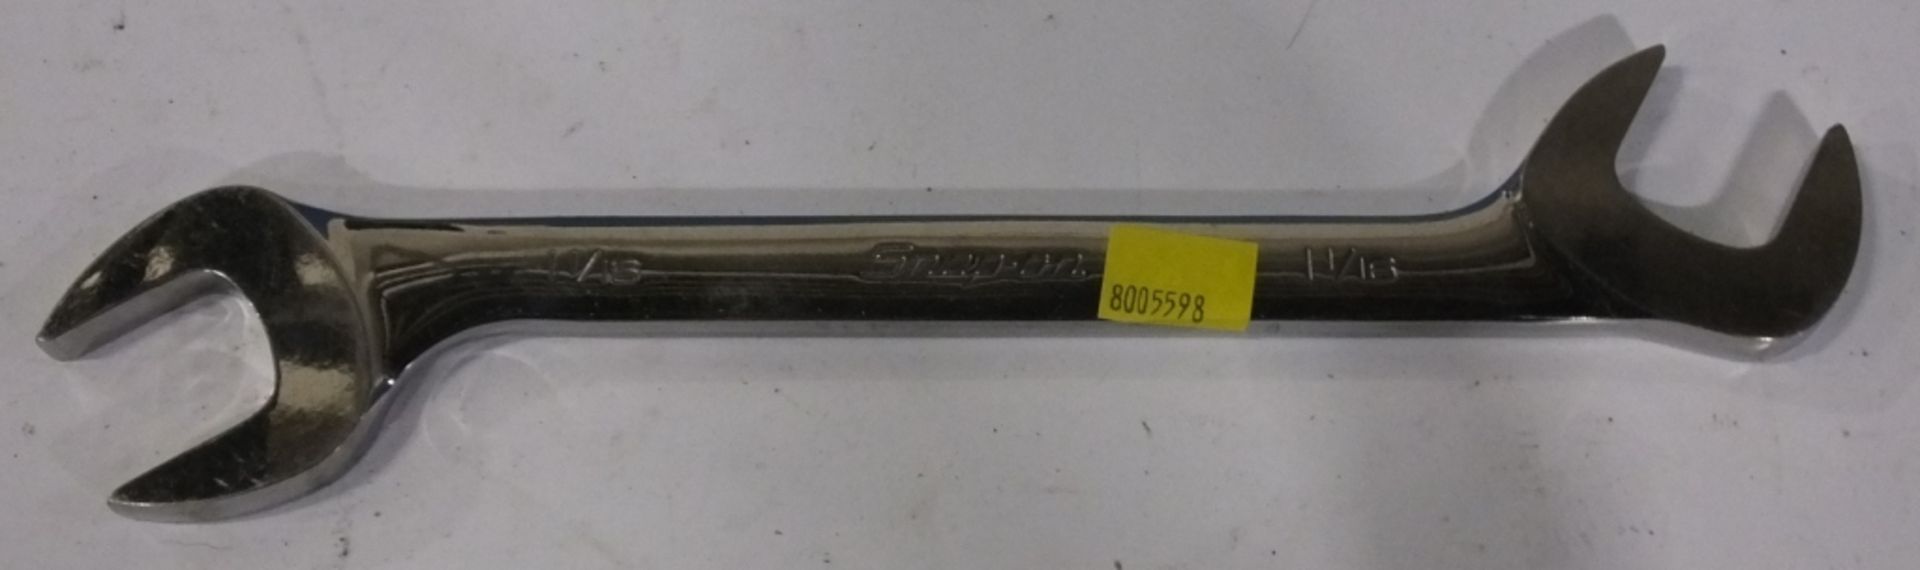 Snap-On spanner - 1 1/16